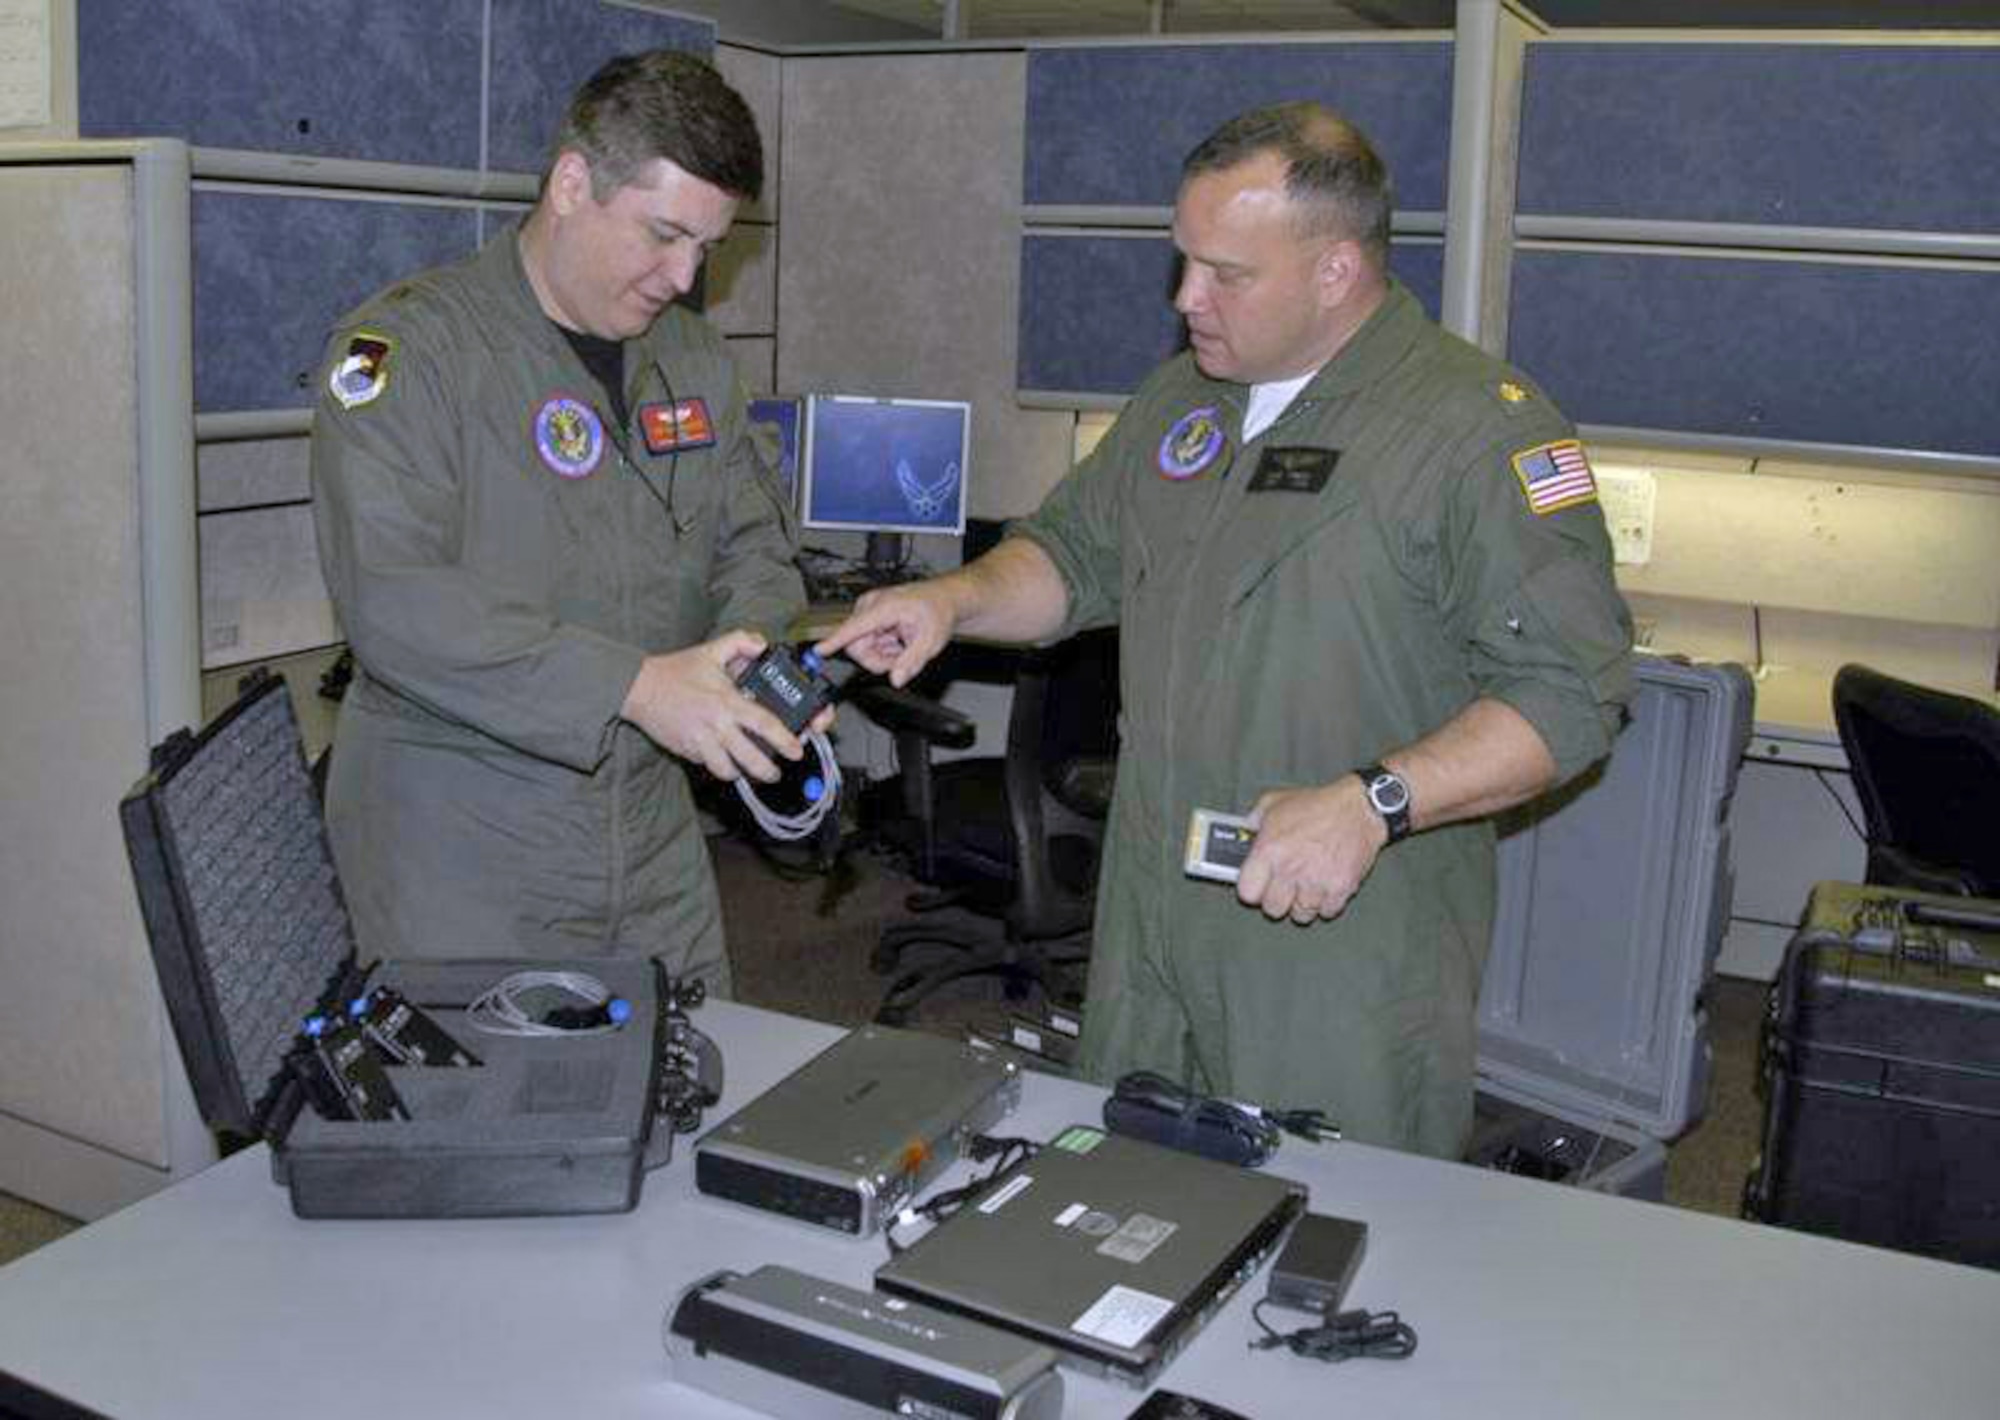 Maj. Jim Gallagher (left) and Navy Lt. Cmdr. Chris Arnett examine Blue Force Tracking devices in preparation for Commander Arnett's deployment in support of Haitian earthquake relief efforts Jan. 13, 2010, at Tyndall Air Force Base, Fla. (U.S. Air Force photo)